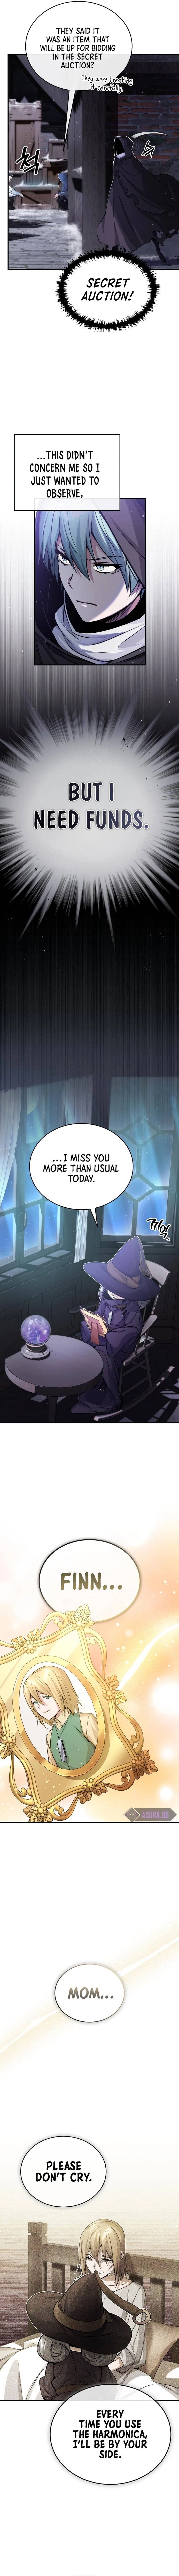 The Dark Magician Transmigrates After 66666 Years Chapter 65